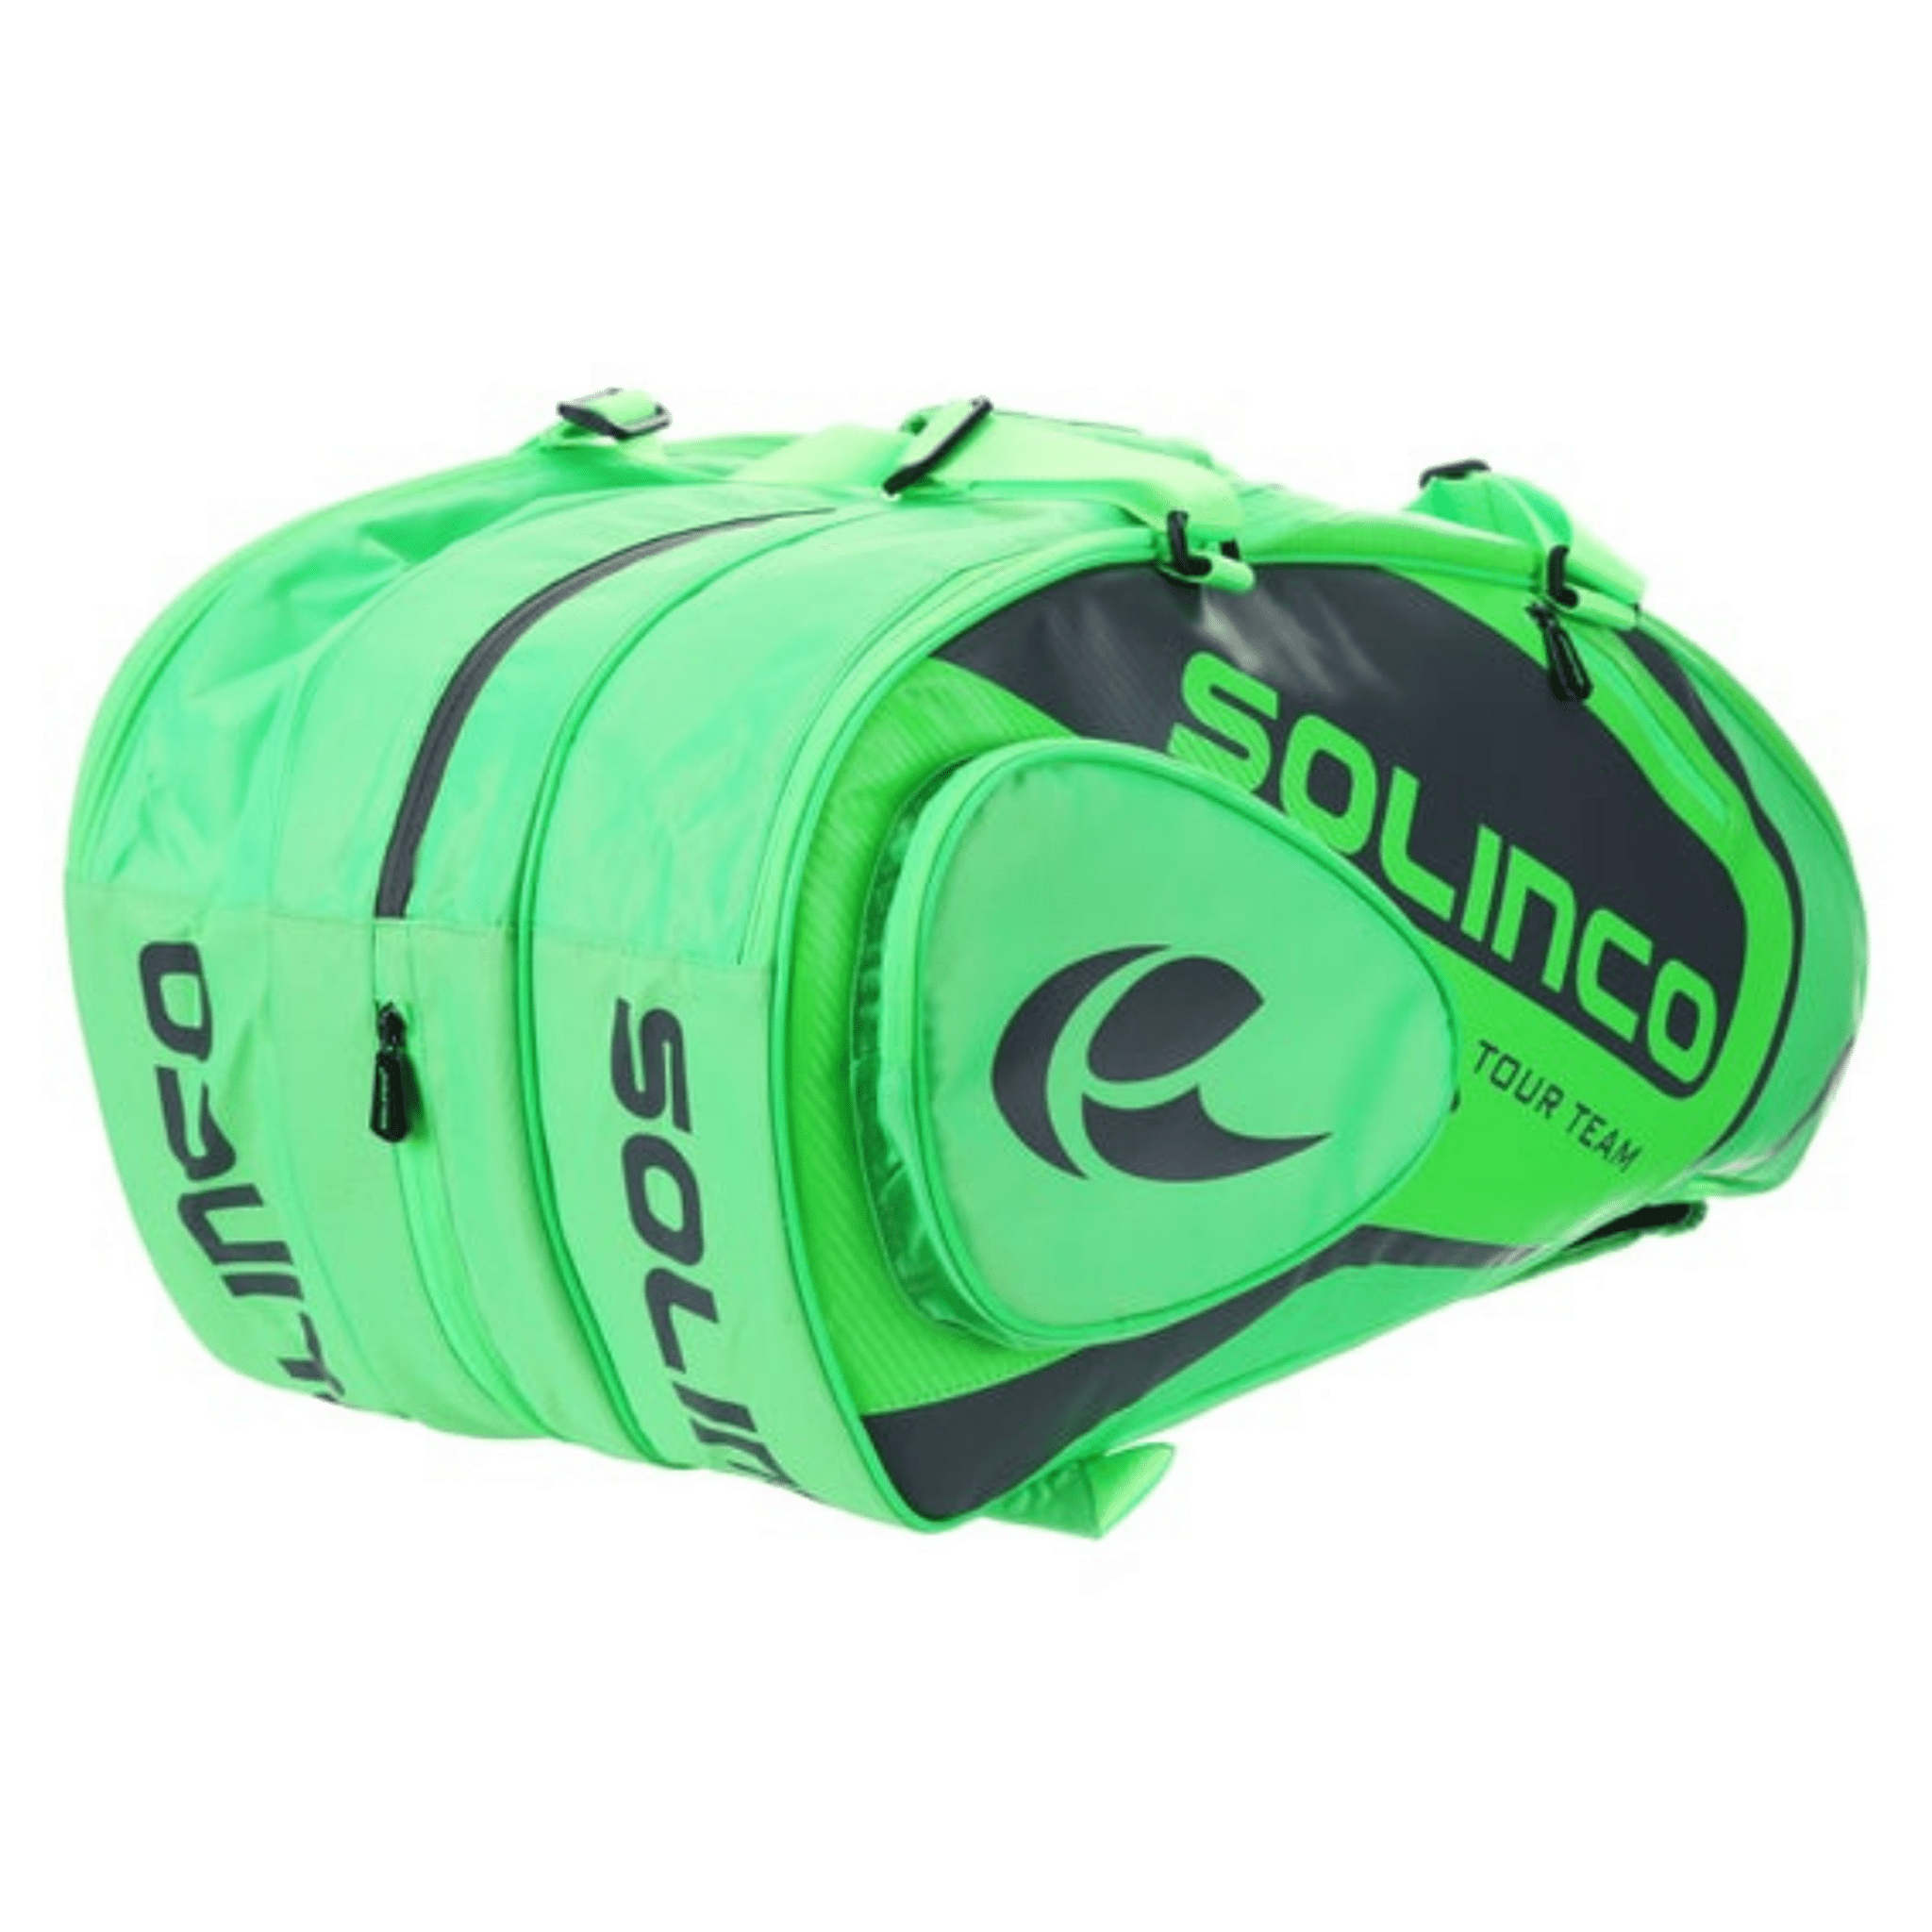 Solinco 15-Pack Tour Bag - Neon Green